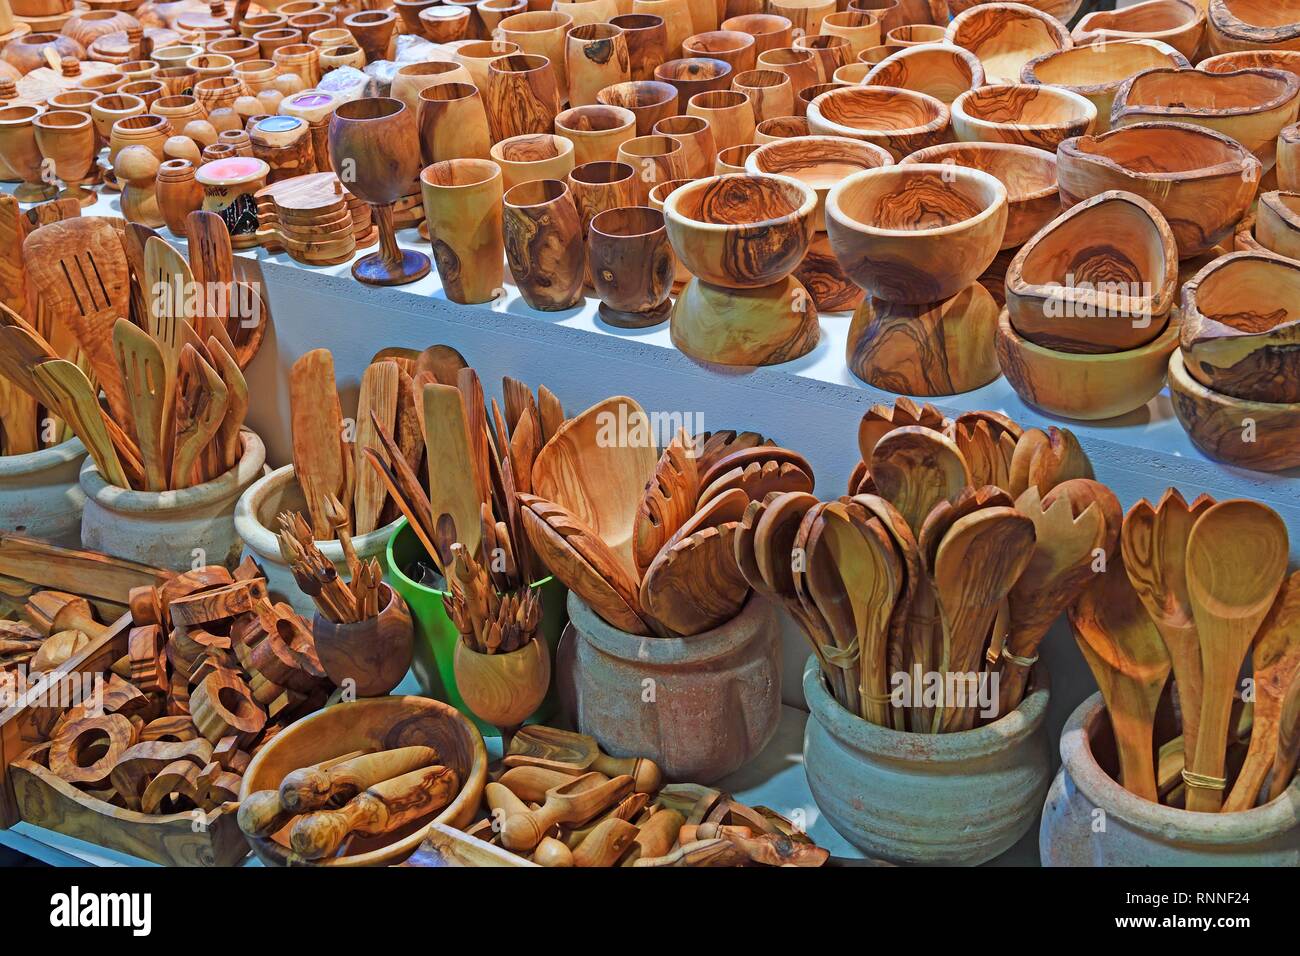 Various kitchen utensils and pots made of olive wood, Germany Stock Photo